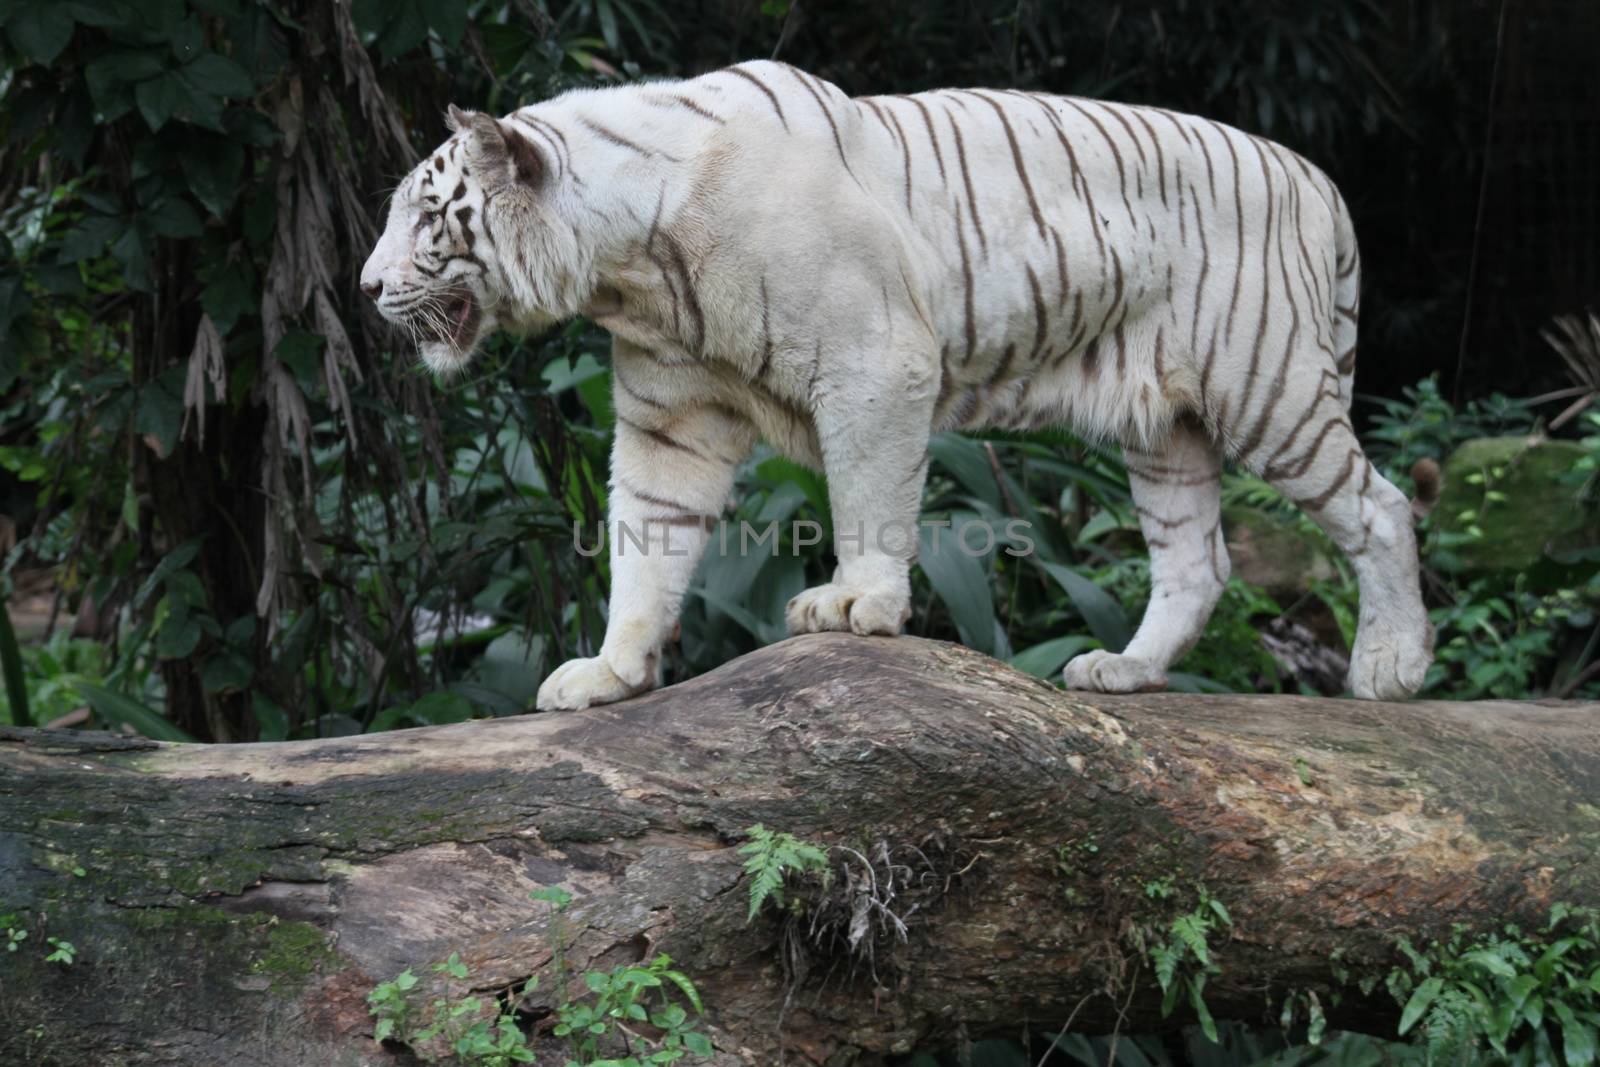 A wild life shot of a white tiger in captivity